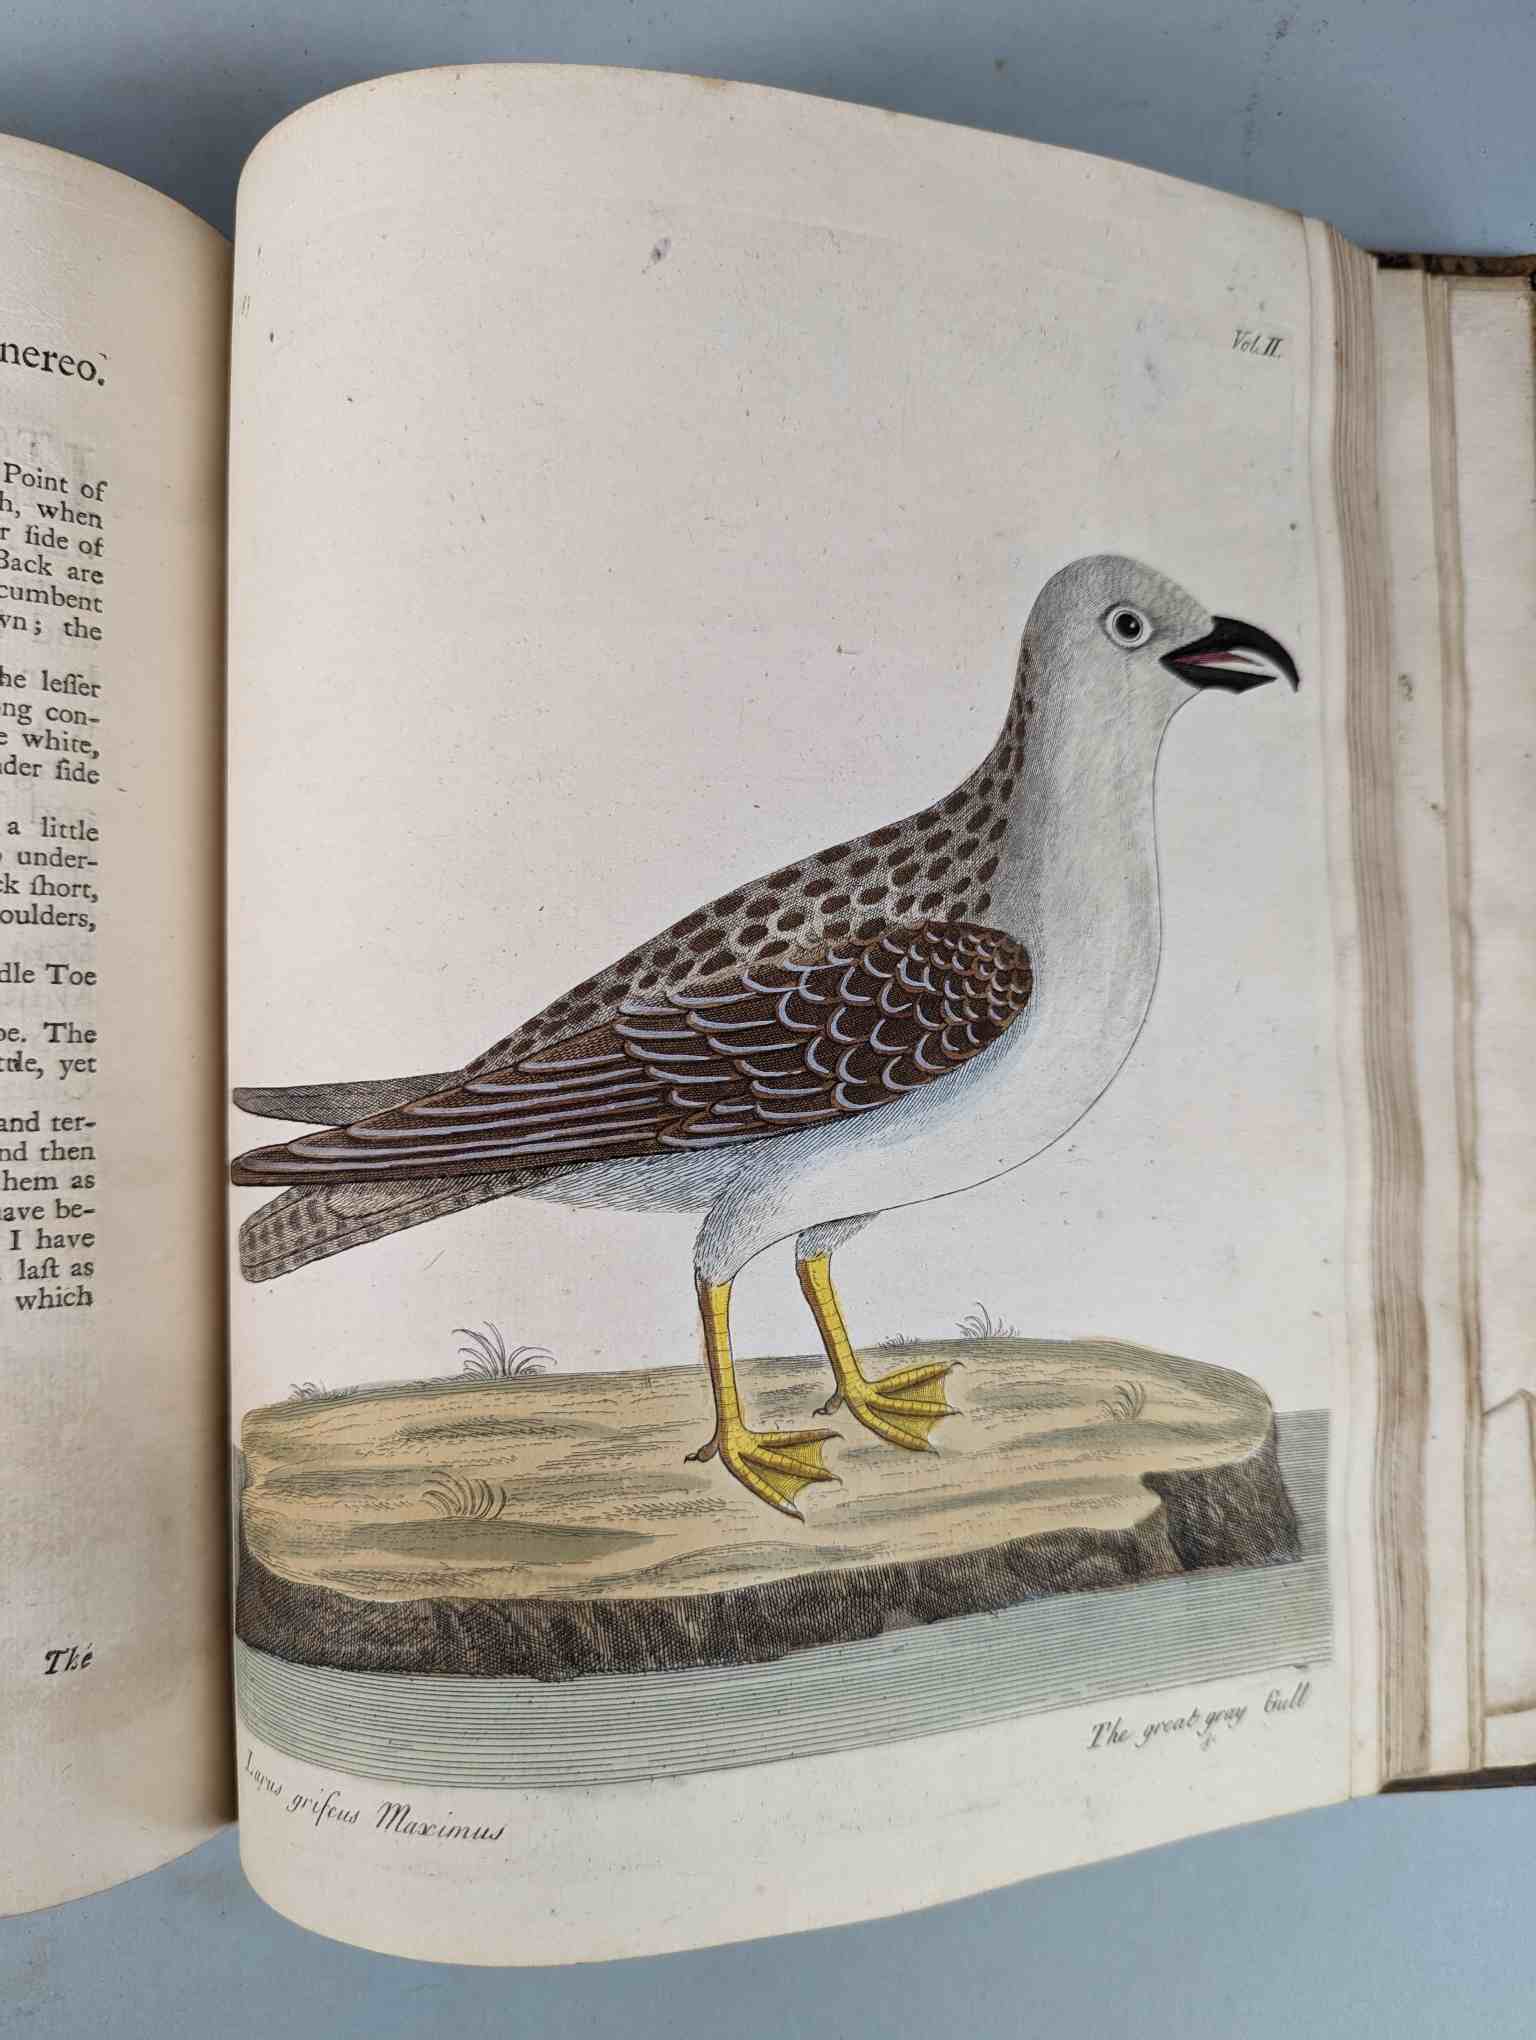 ALBIN, Eleazar. A Natural History of Birds, to which are added, Notes and Observations by W. - Image 187 of 208